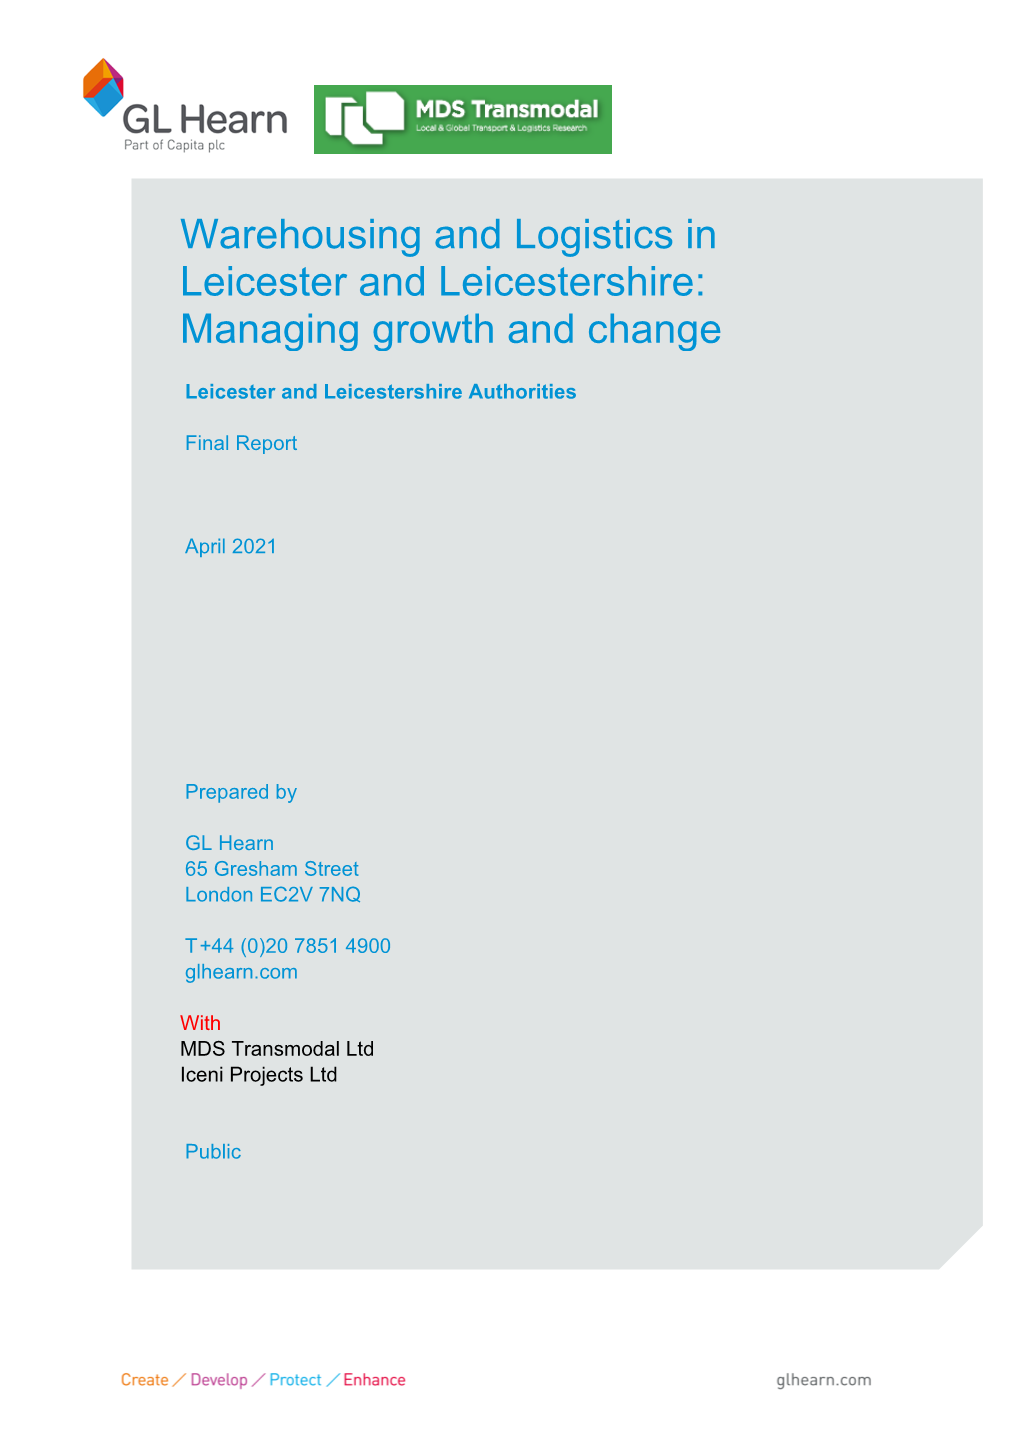 Warehousing and Logistics in Leicester and Leicestershire: Managing Growth and Change